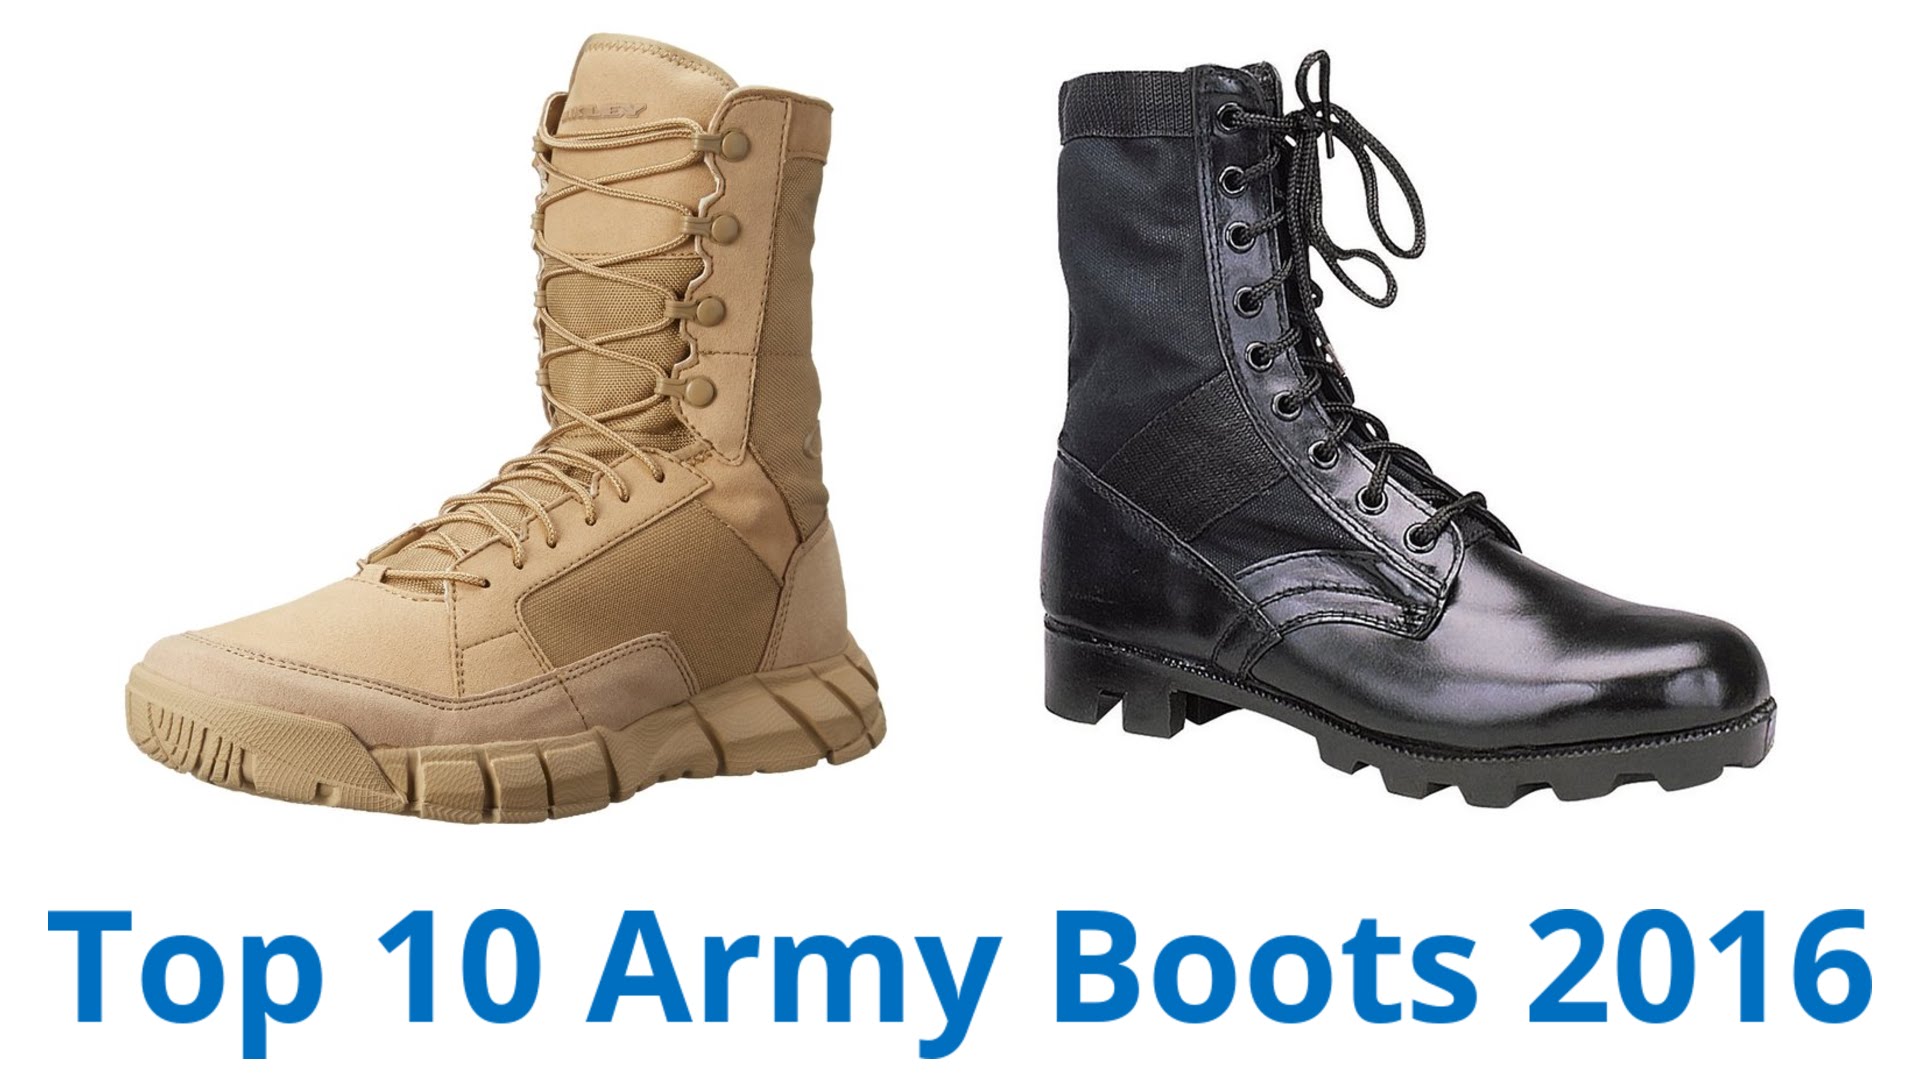 10 best army boots 2016 - youtube CPHZFED